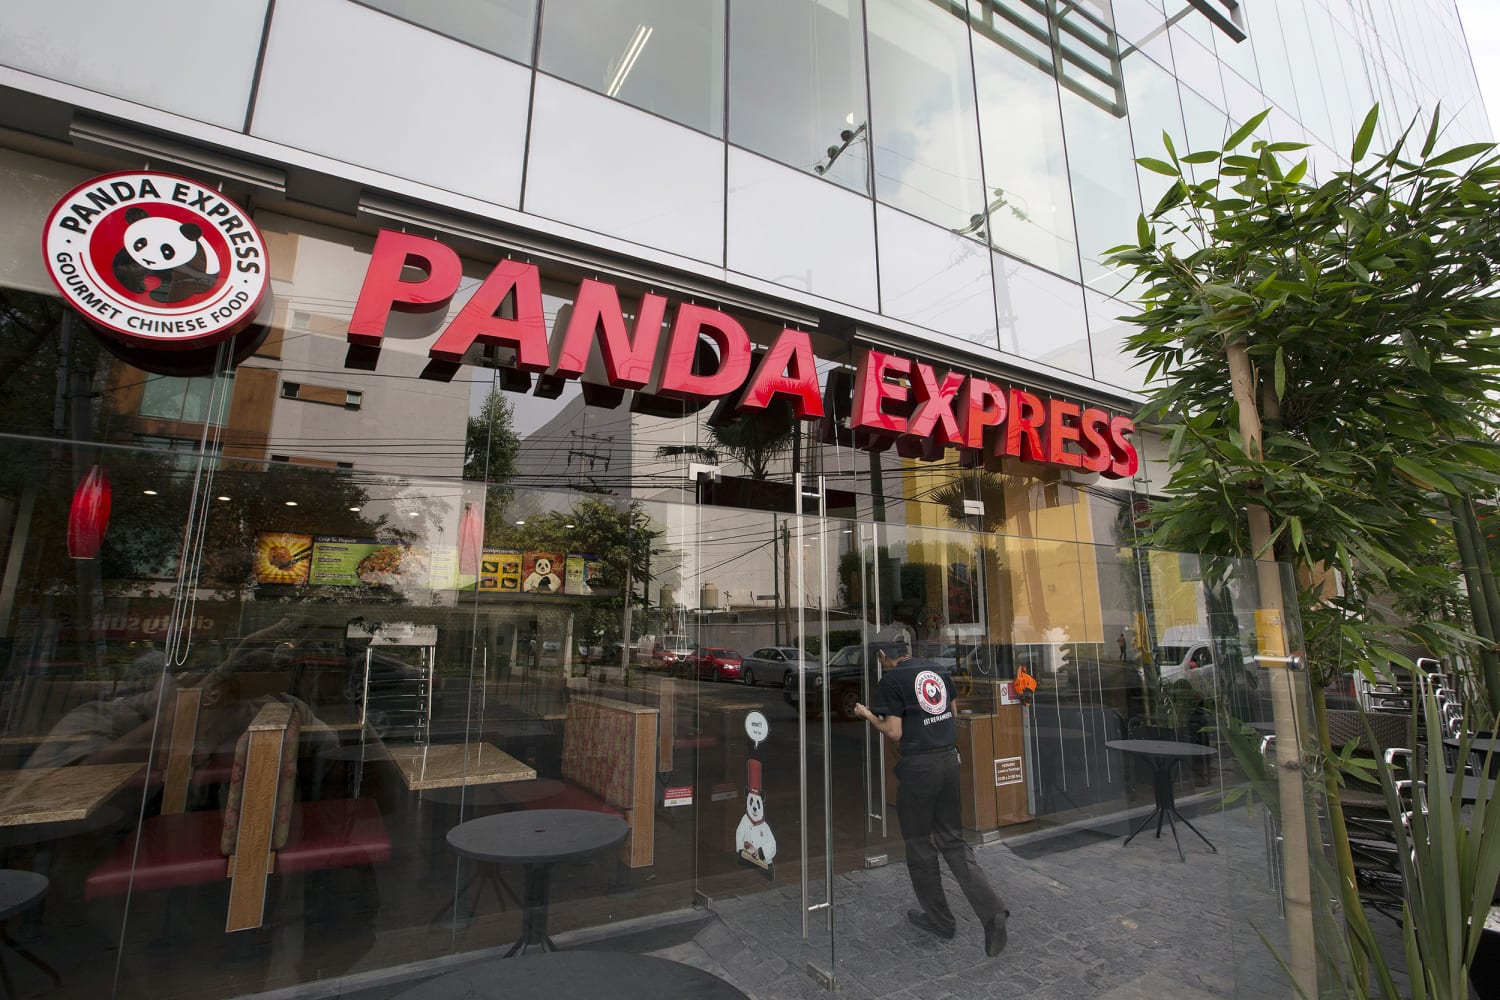 Panda Express employee forced to strip during trust-building exercise, lawsuit says image